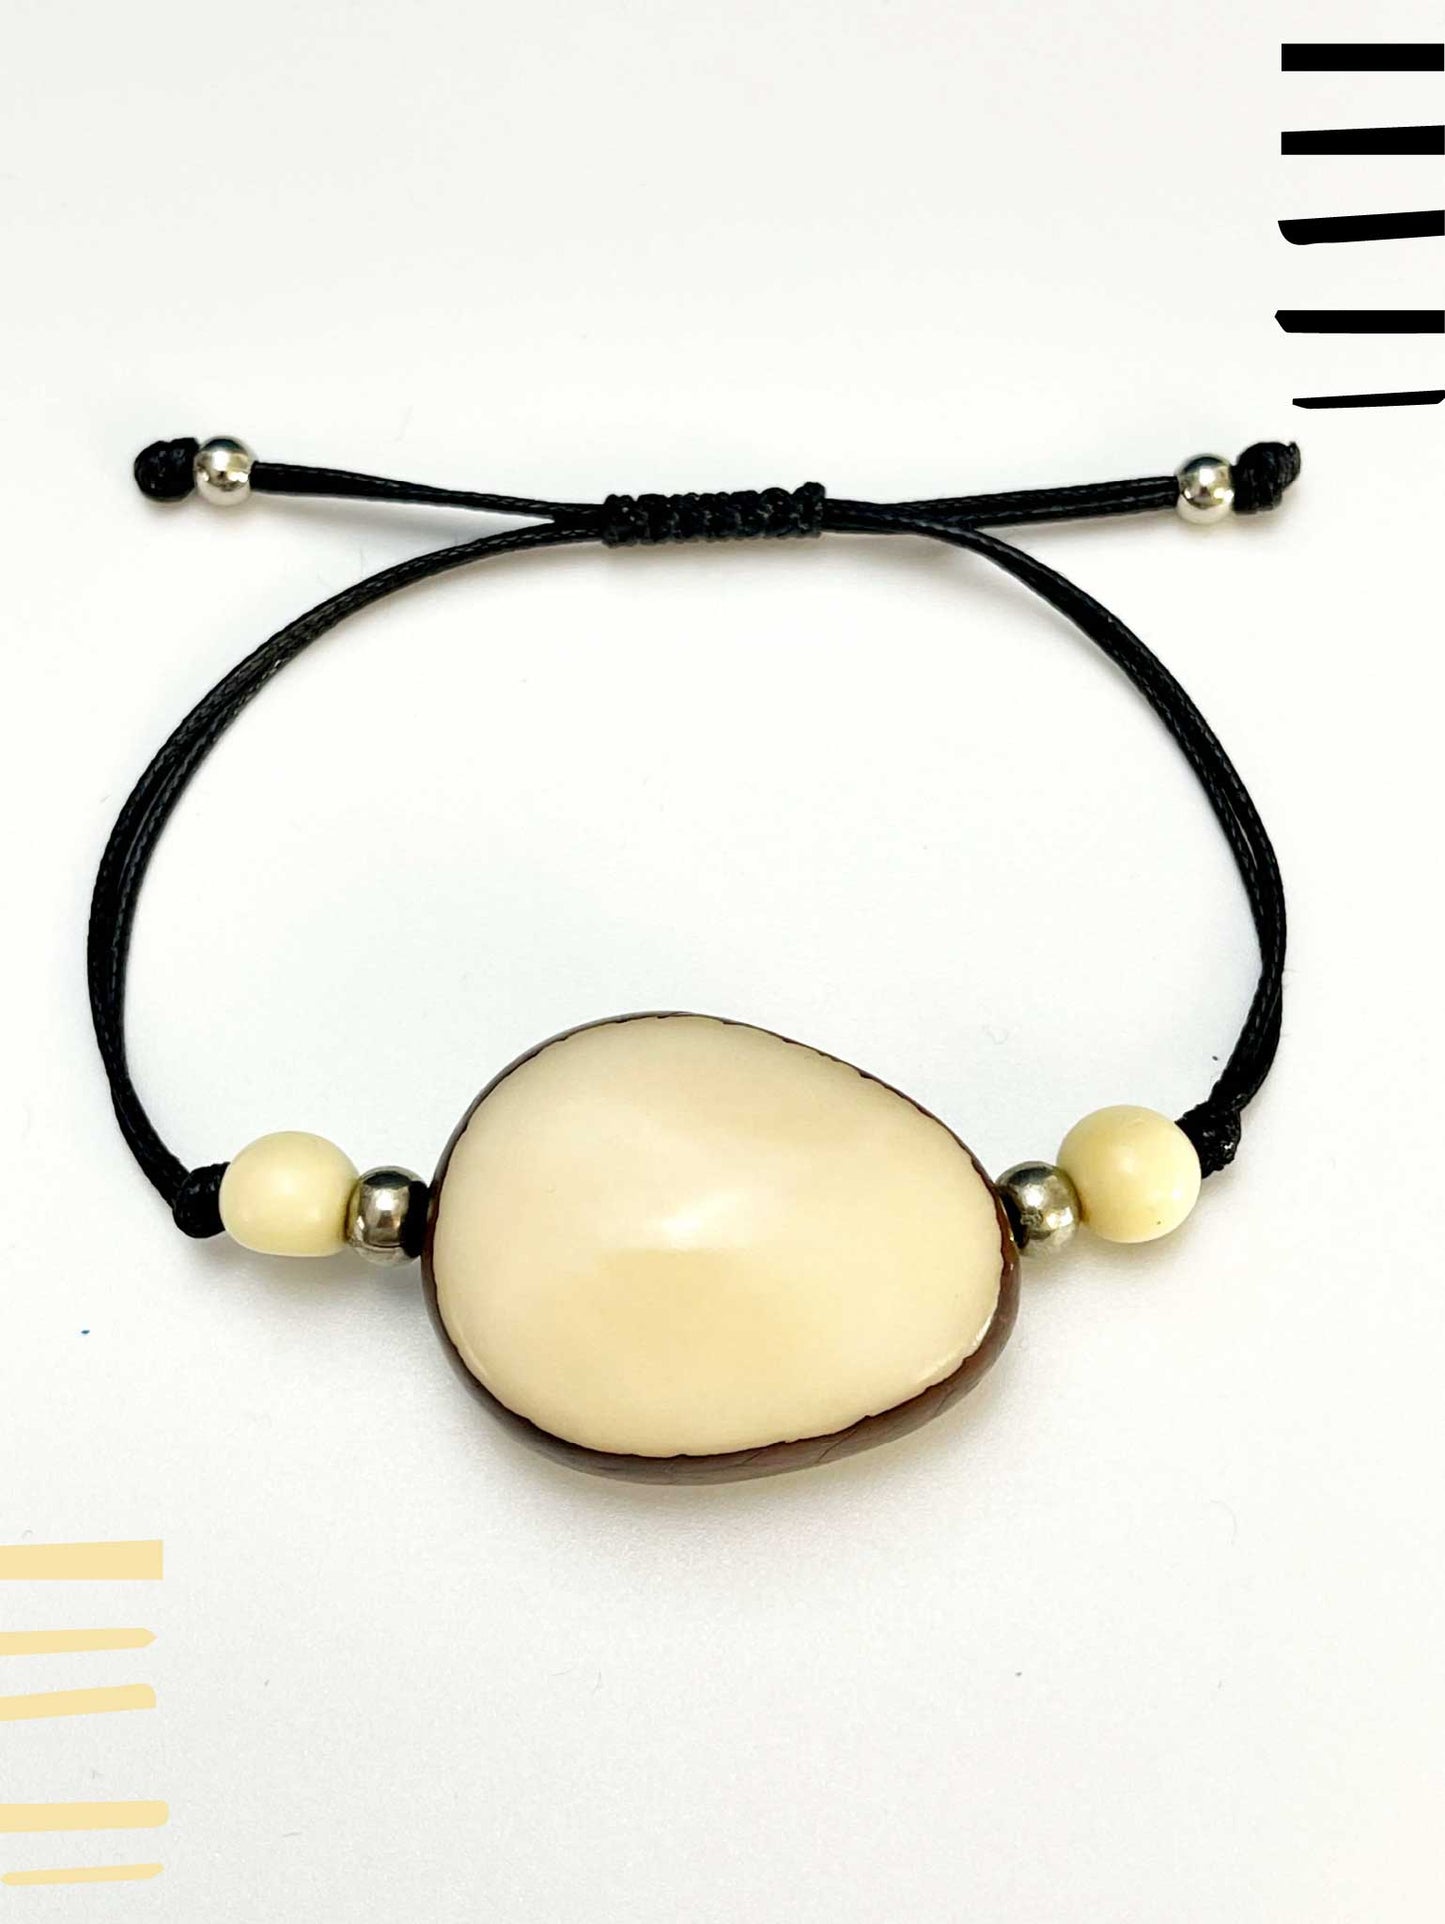 Dirty Stone Crafted bracelet in Tagua Nut